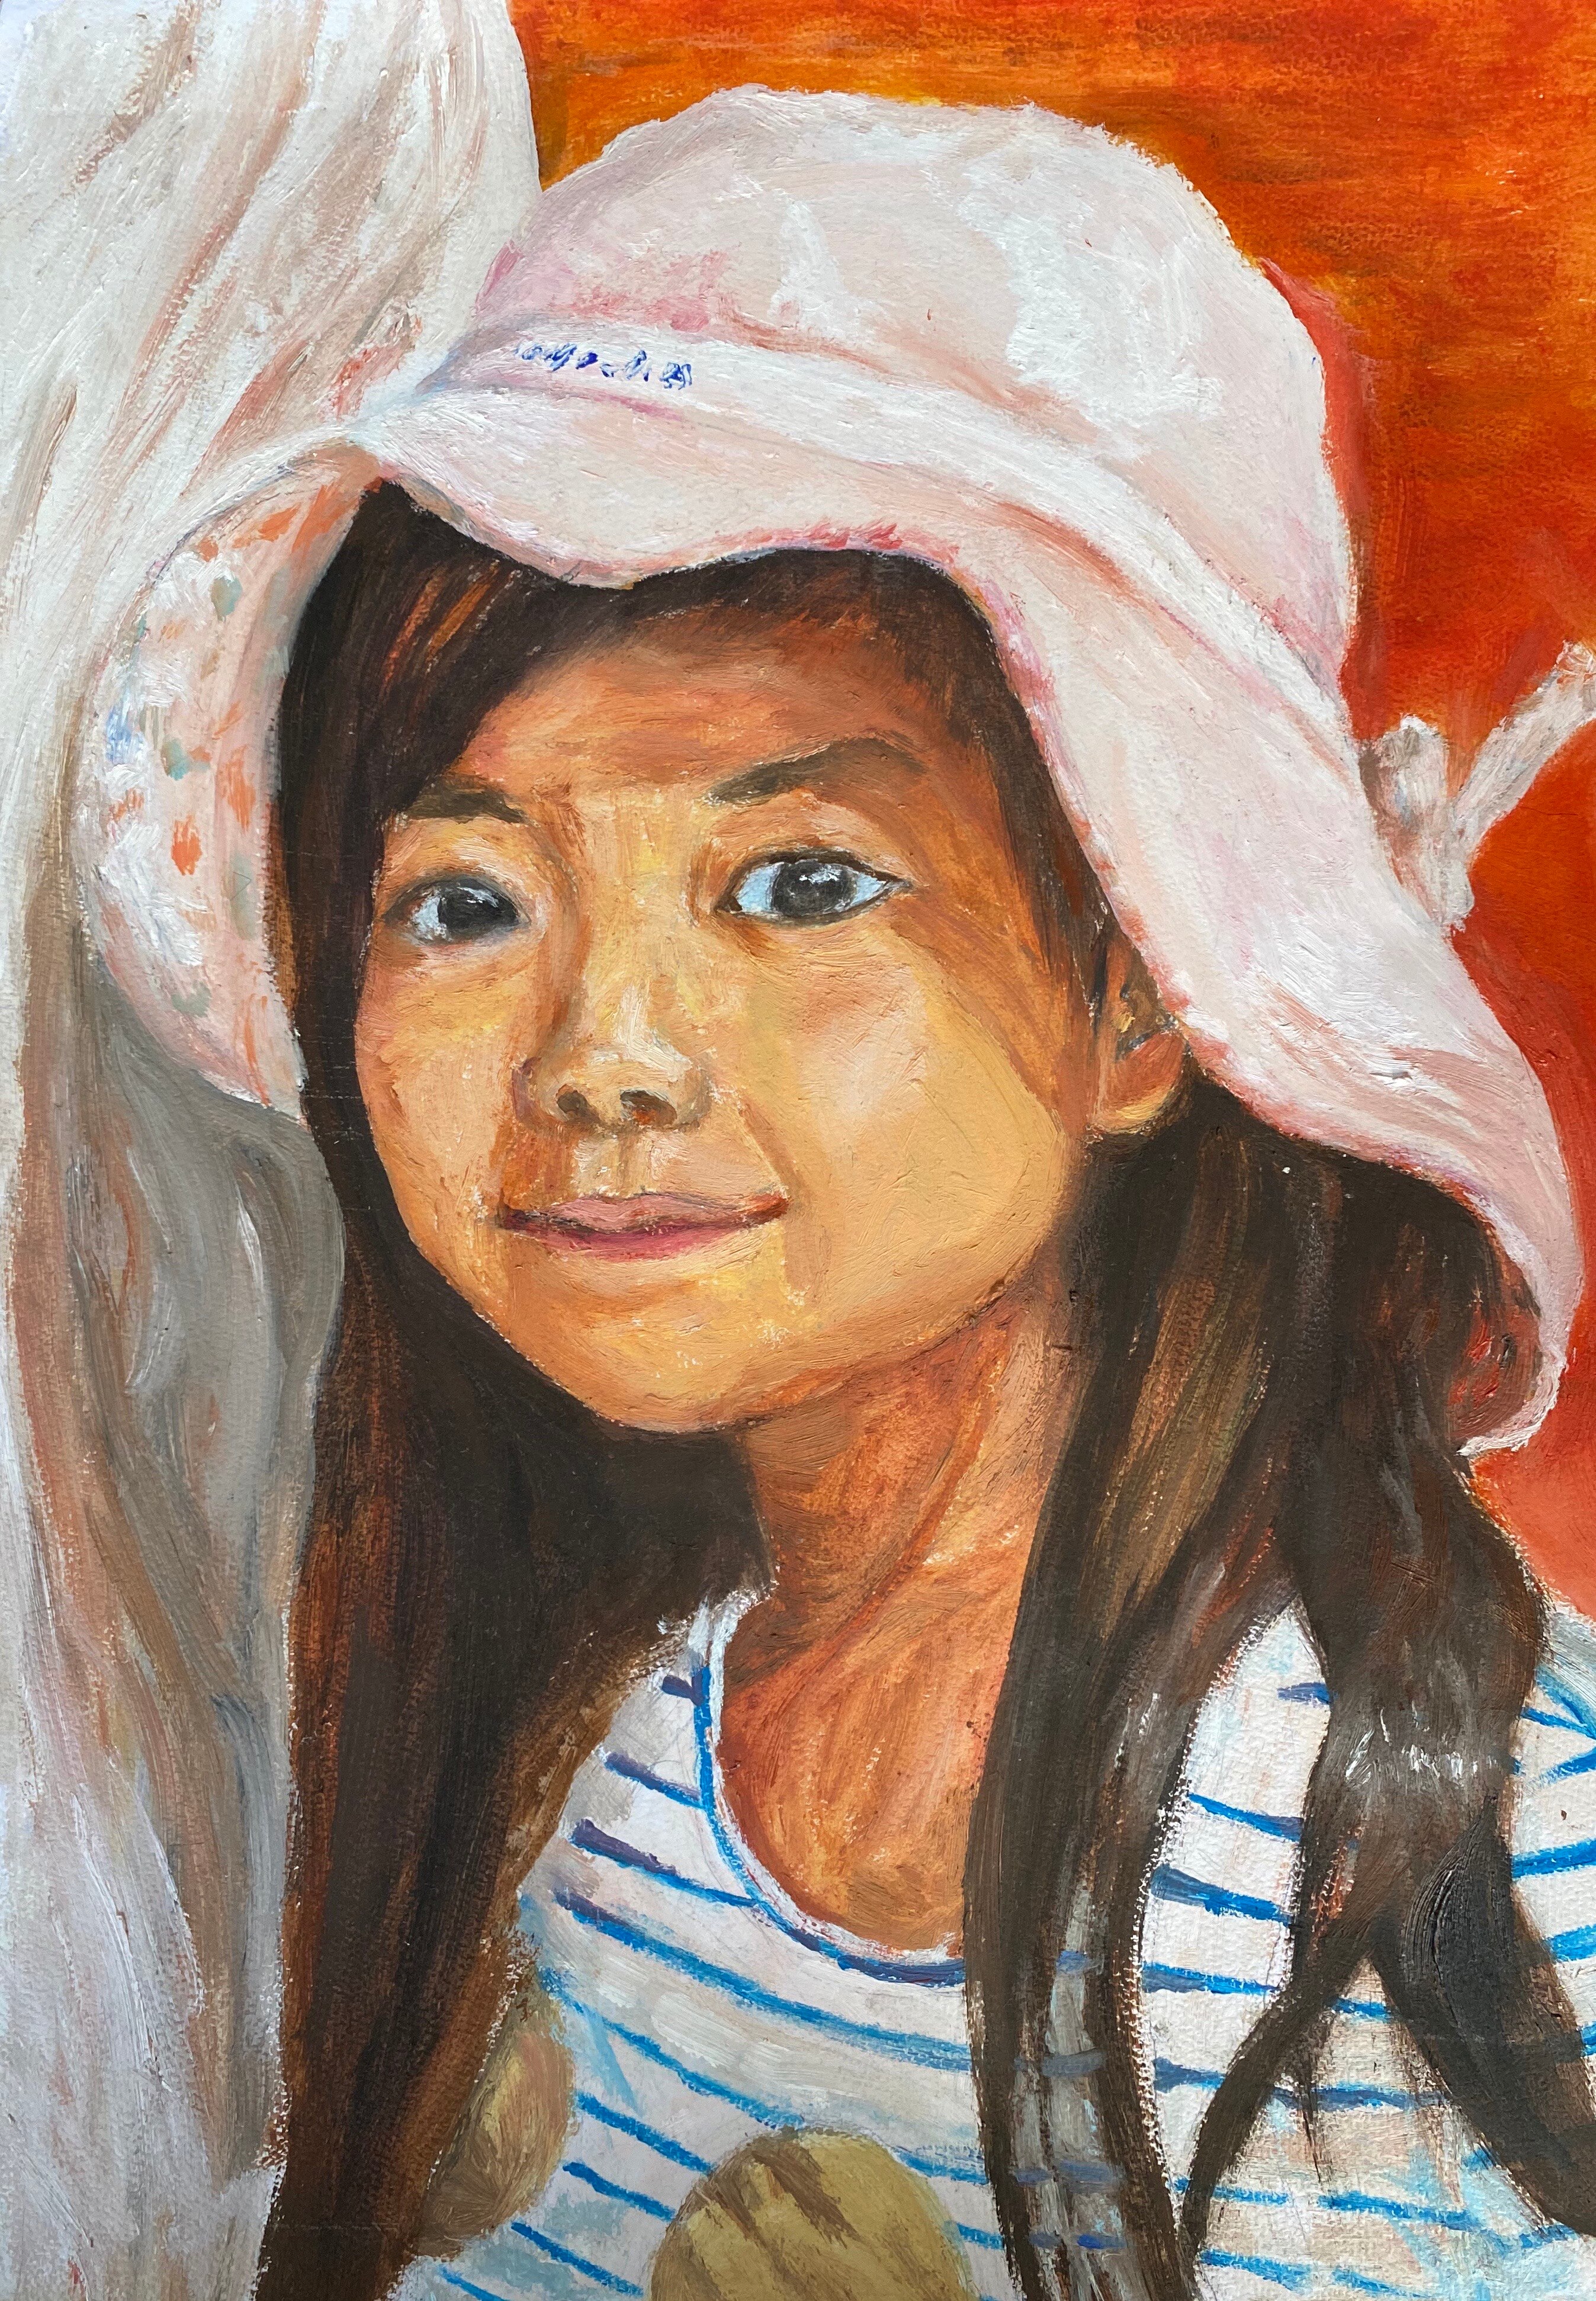 Portrait of sister painted by Jaylan Yang, created during COVID-19 lock-down period